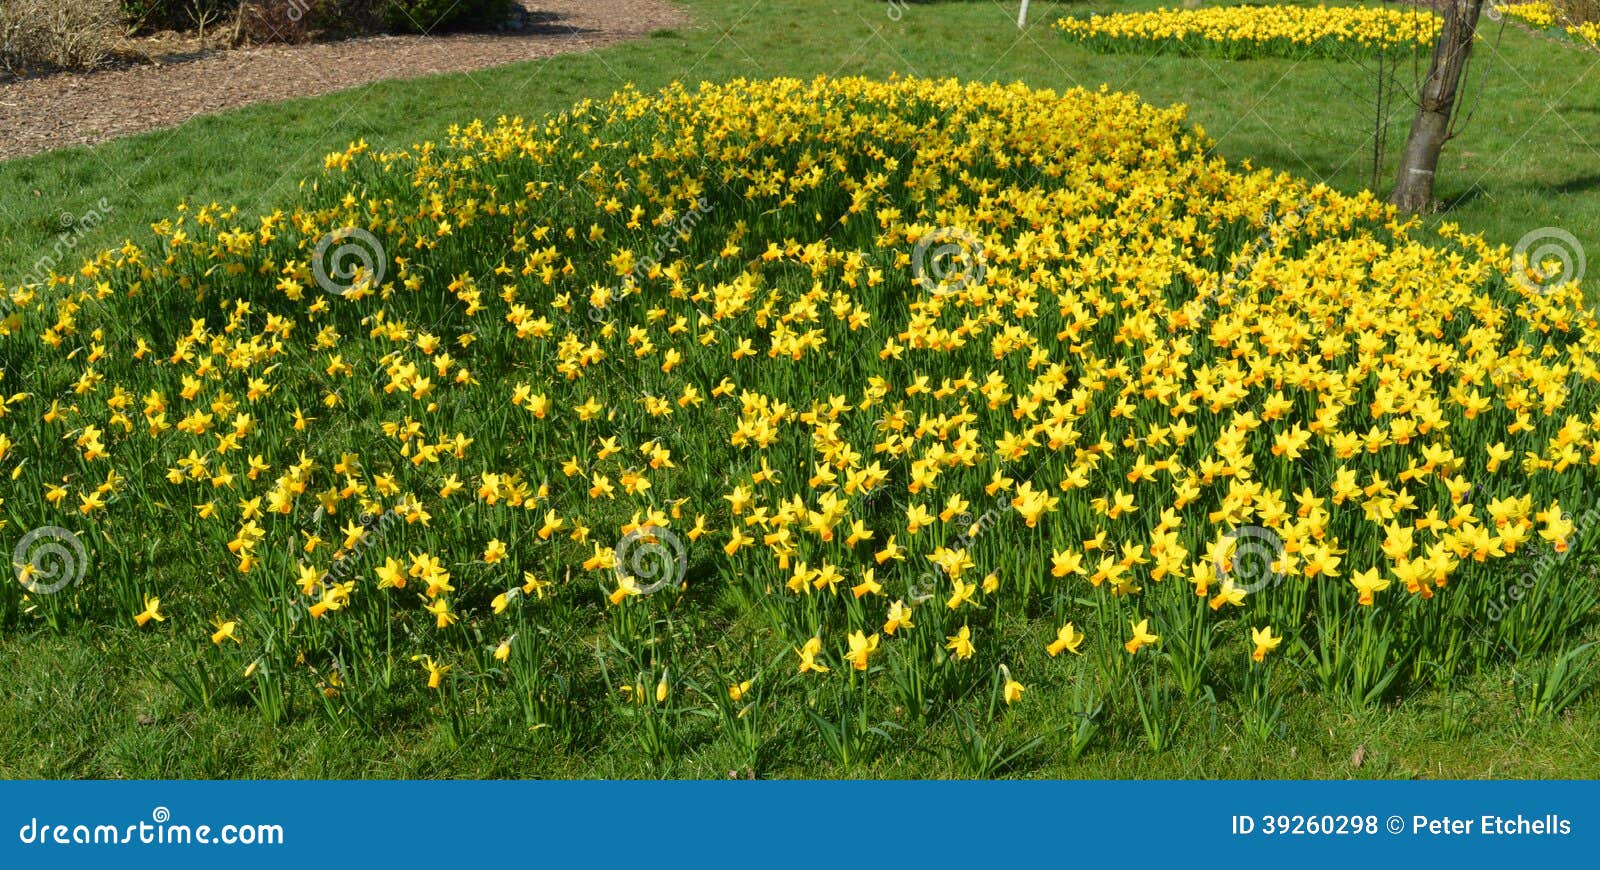 Narcissus Tete-a-Tete stock photo. Image of yellow, flowering - 39260298